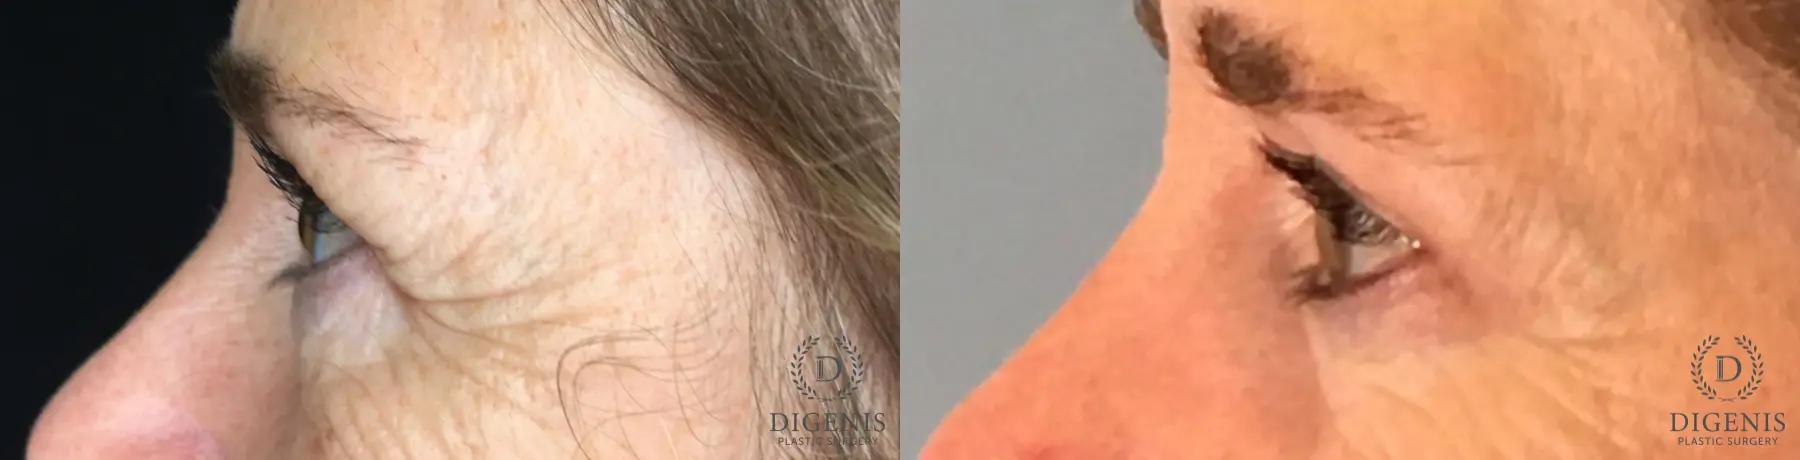 Blepharoplasty: Patient 6 - Before and After 3